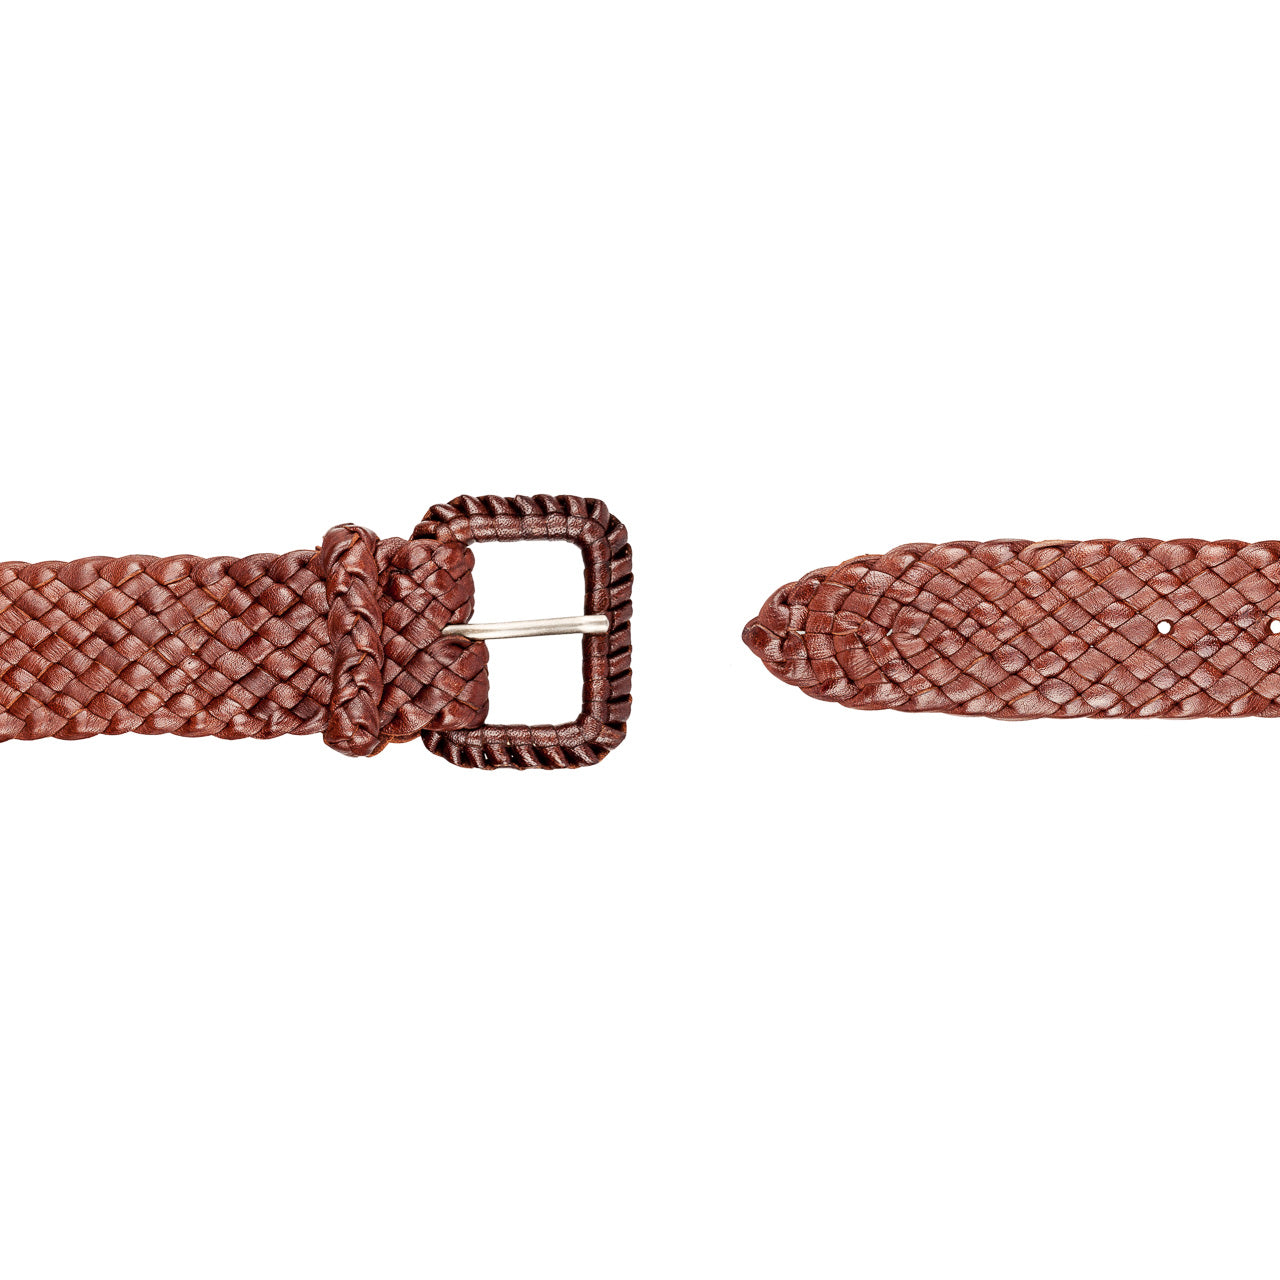 Tan Ladies Jackaroo: hardworking, belt. Contemporary, perfect for any outfit. 12 strands Kangaroo Leather, hand-plaited in Brisbane. Durable, supple, stylish. 